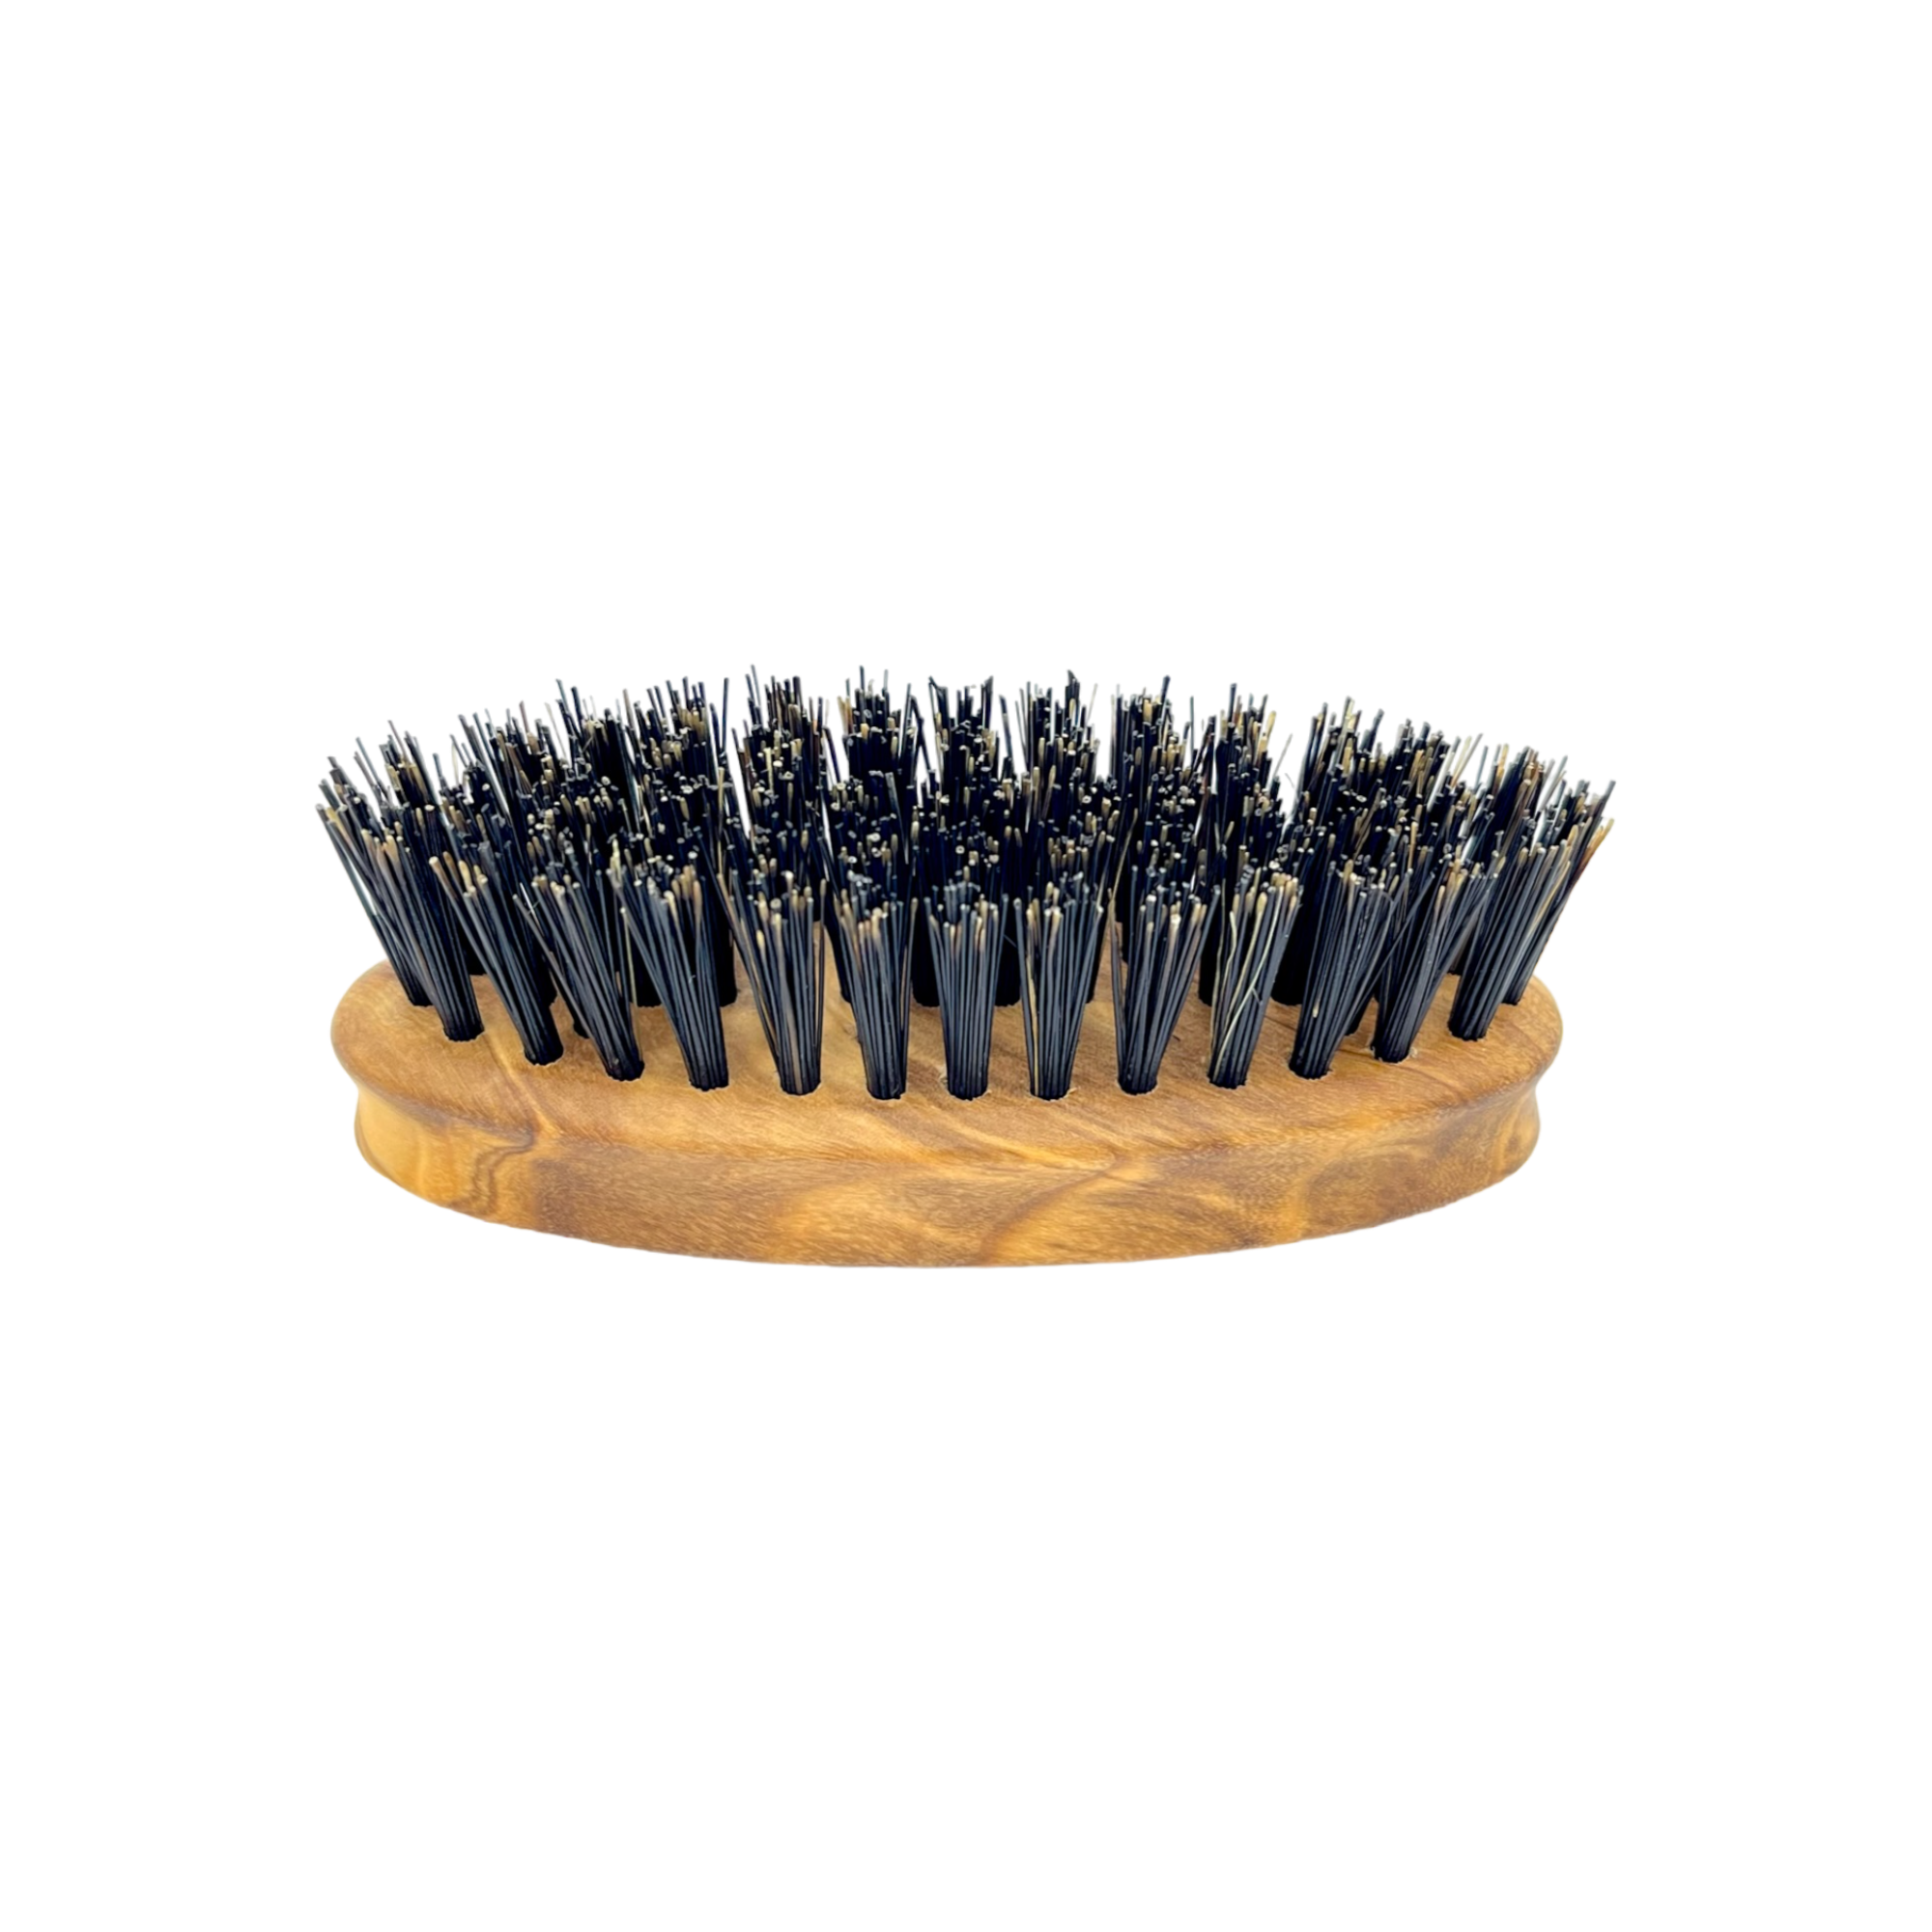 Dural Olive wood bear brush with boar bristles